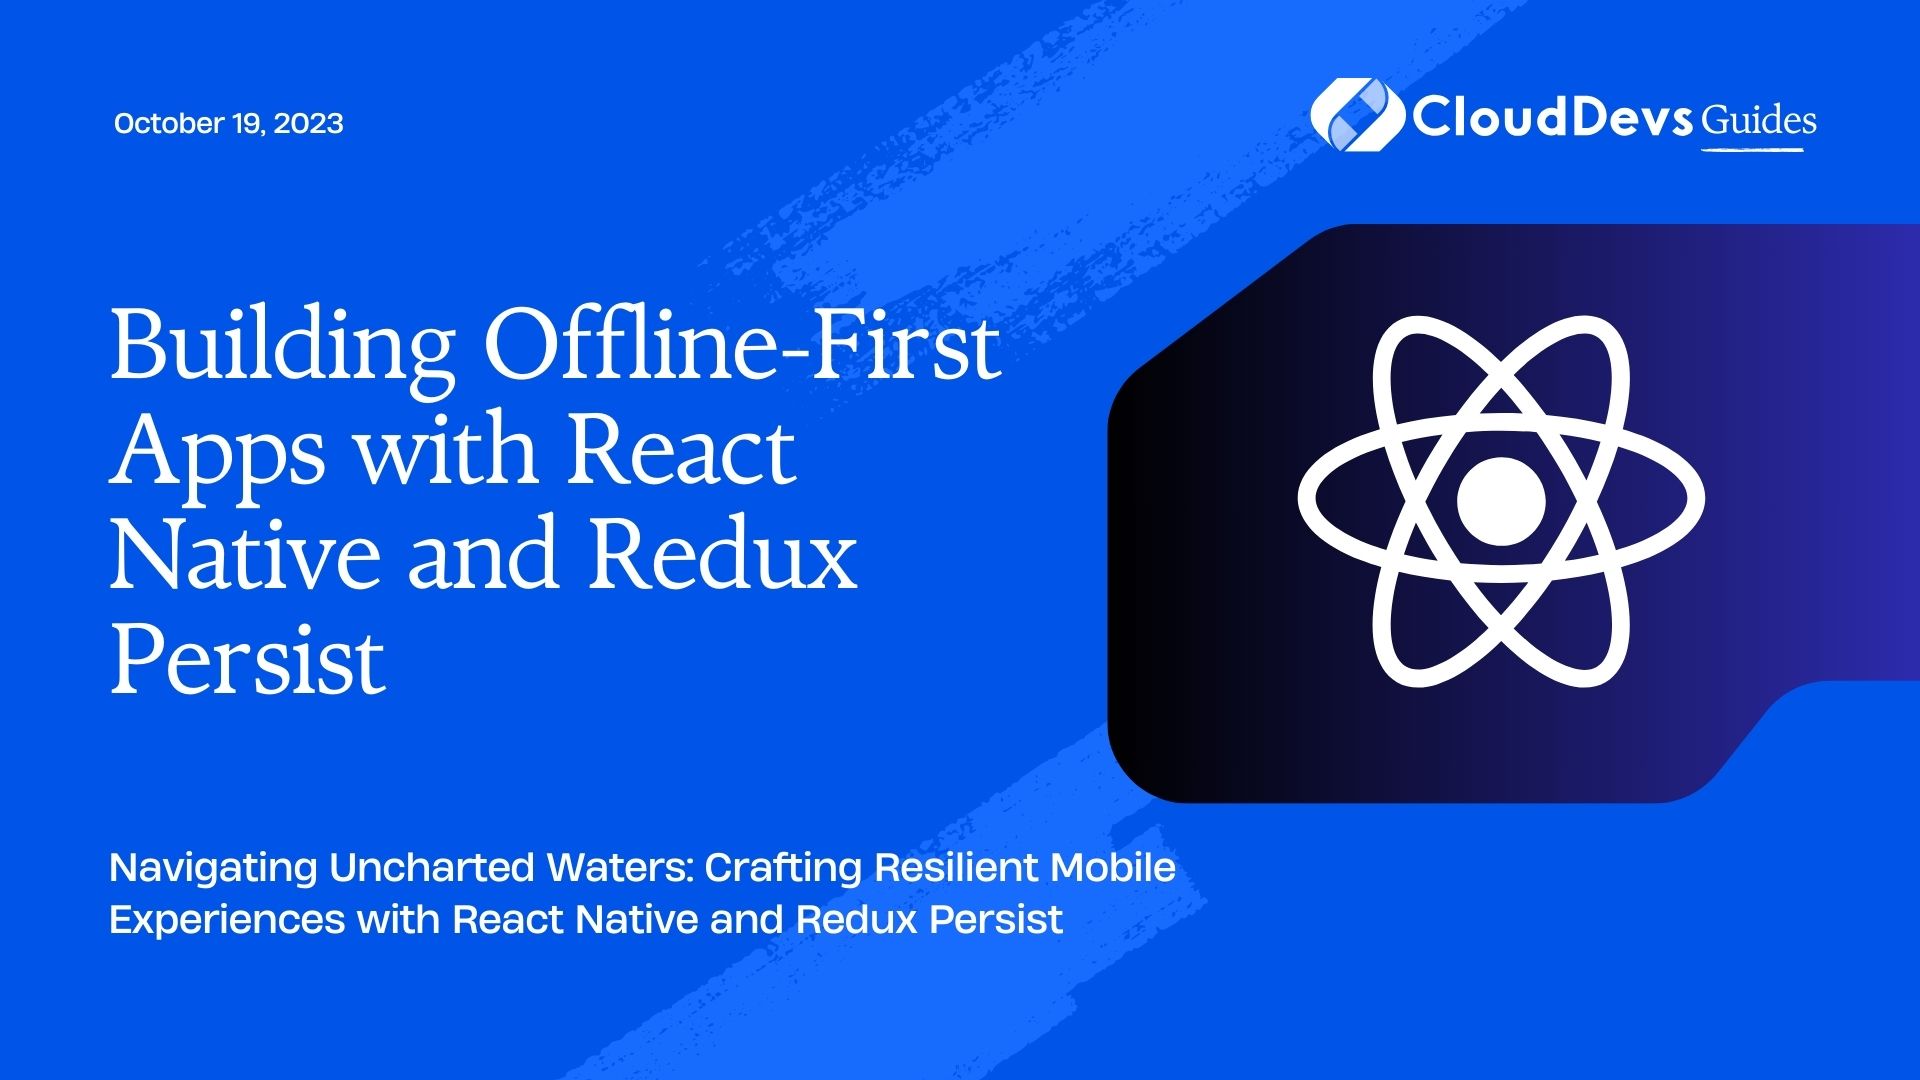 Building Offline-First Apps with React Native and Redux Persist